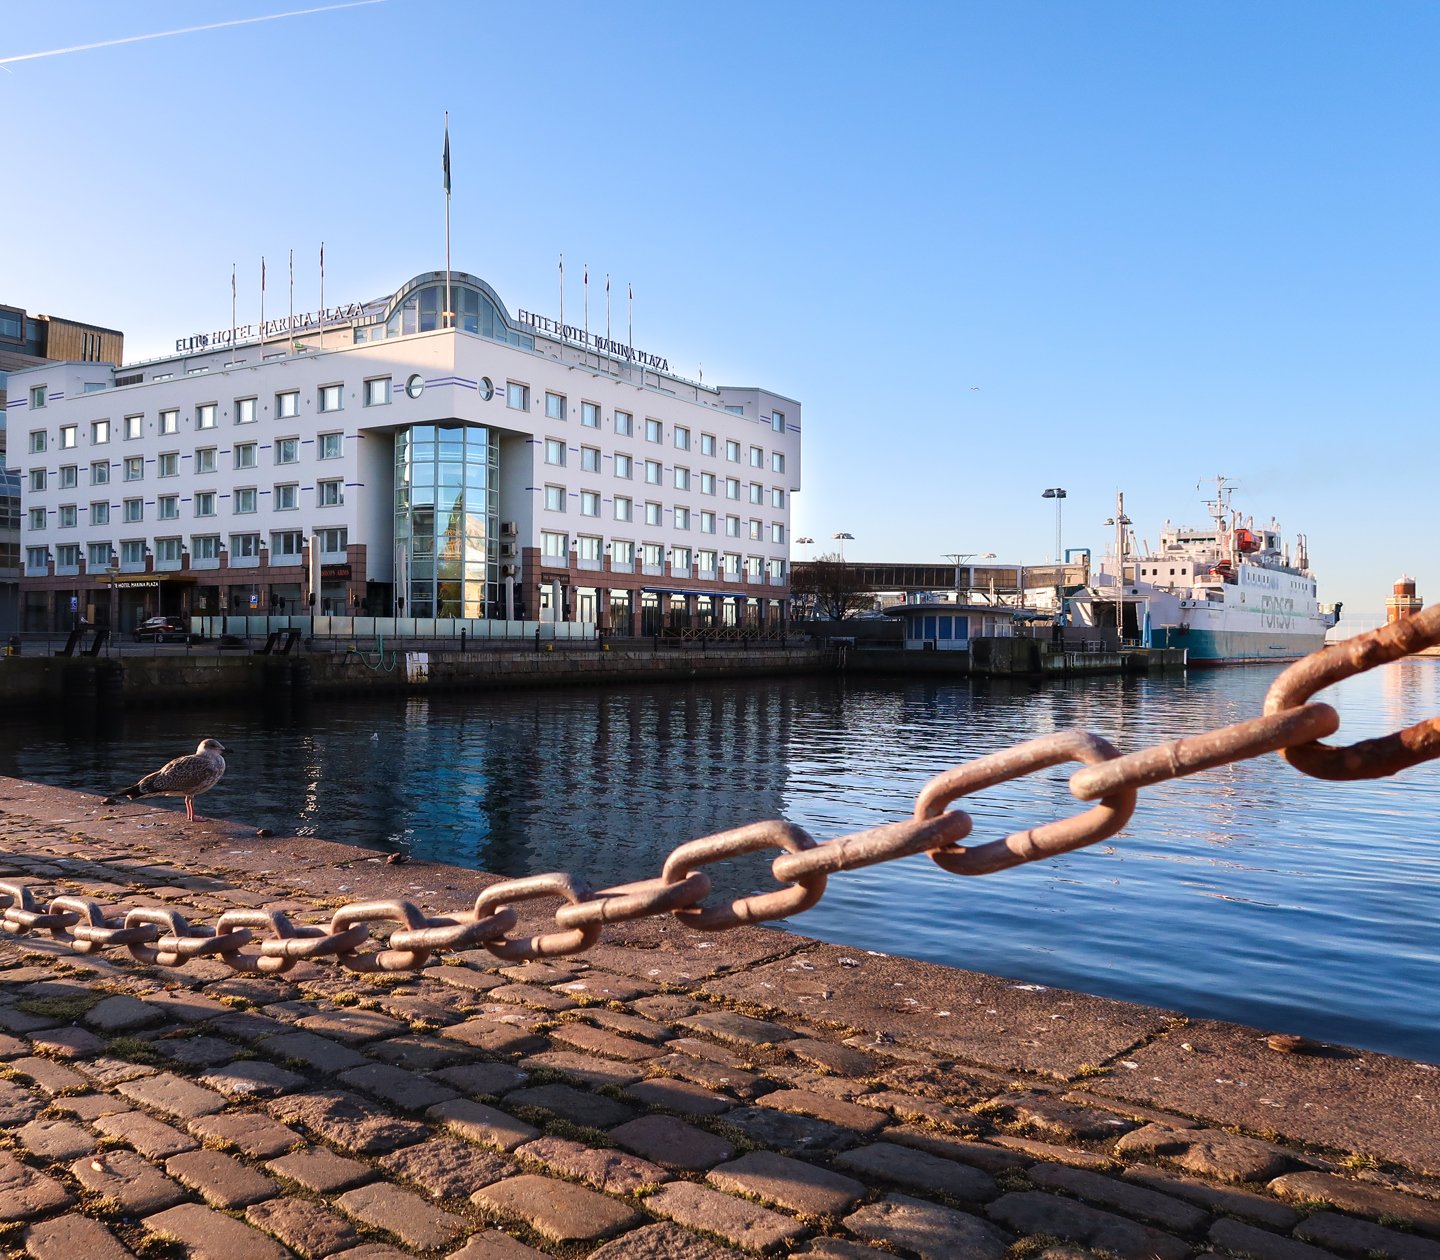 A large white building in the harbour of Helsingborg